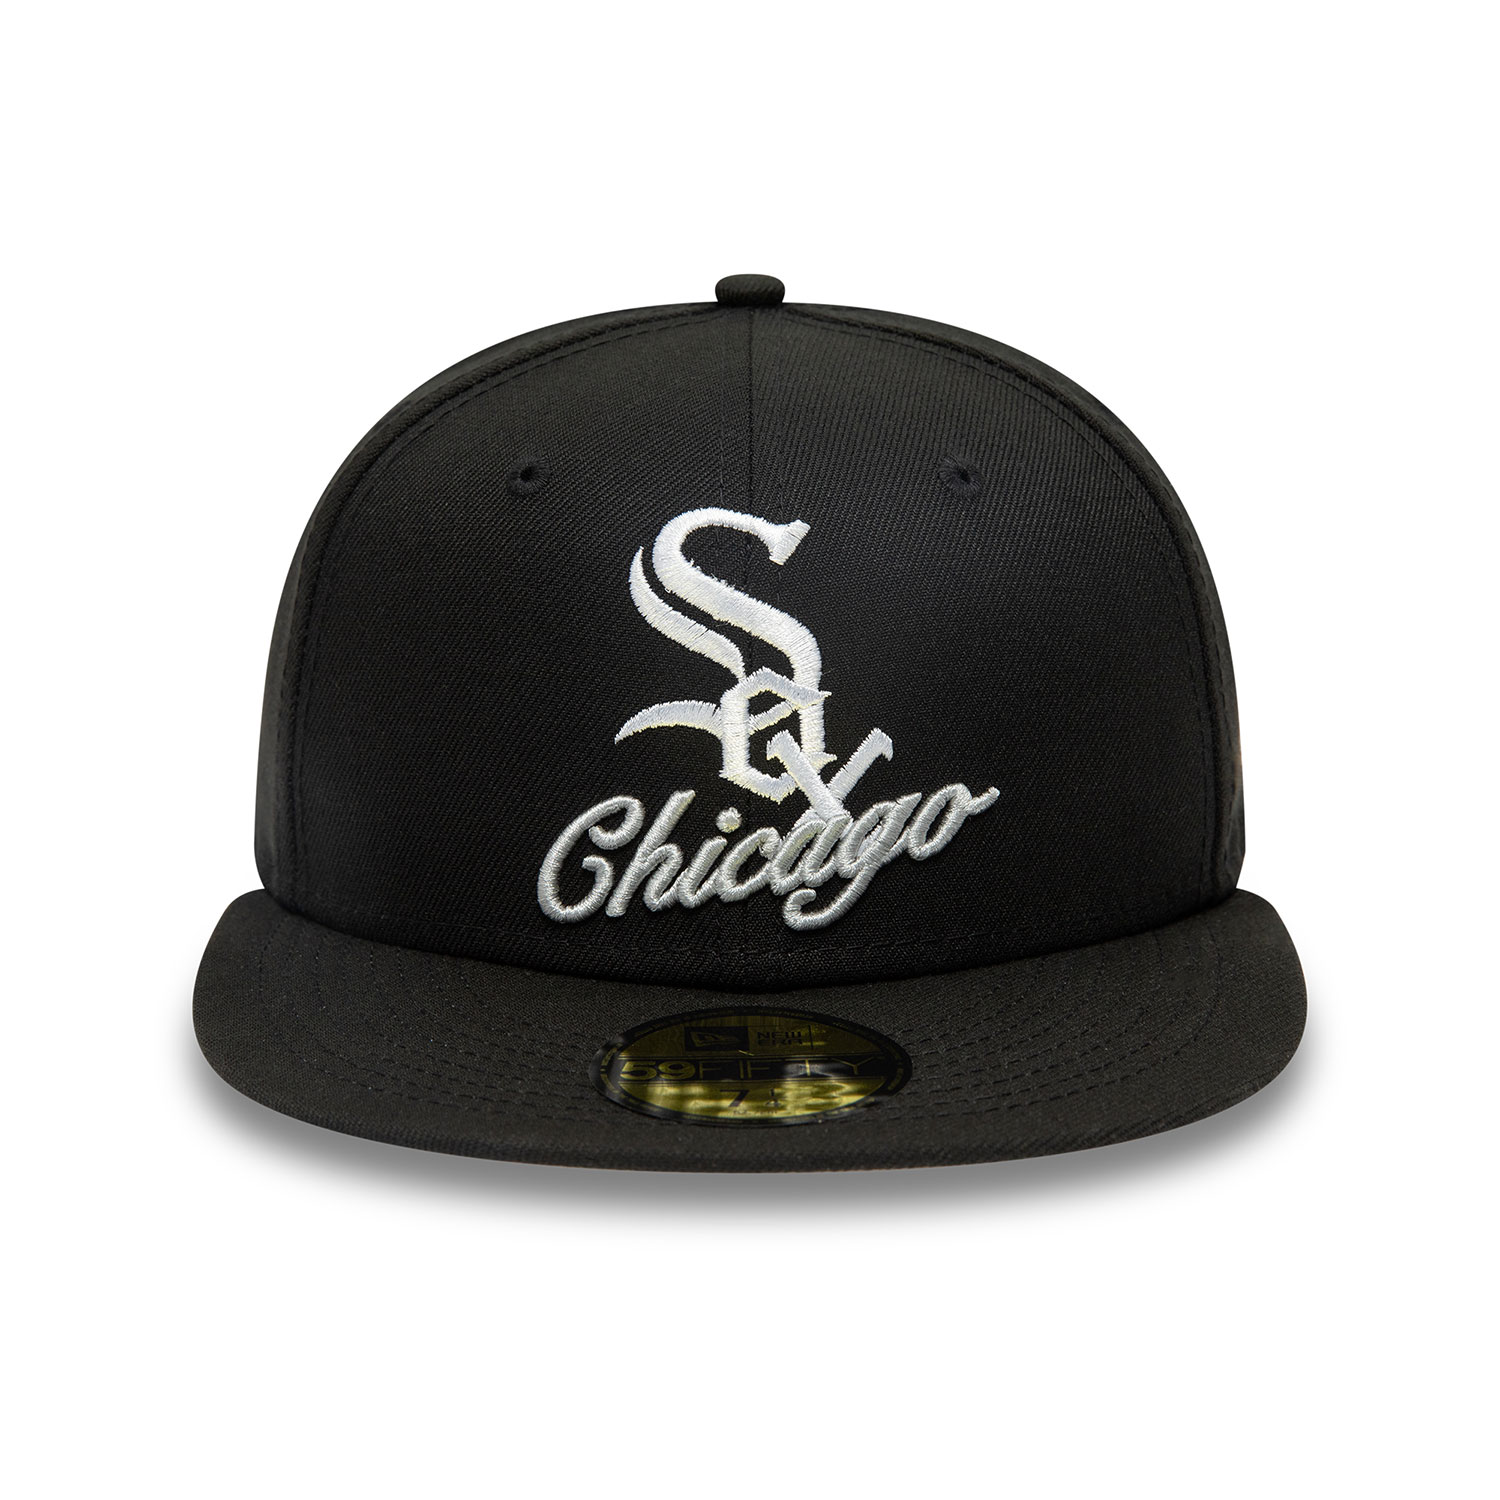 Chicago White Sox Dual Logo Black 59FIFTY Fitted Cap